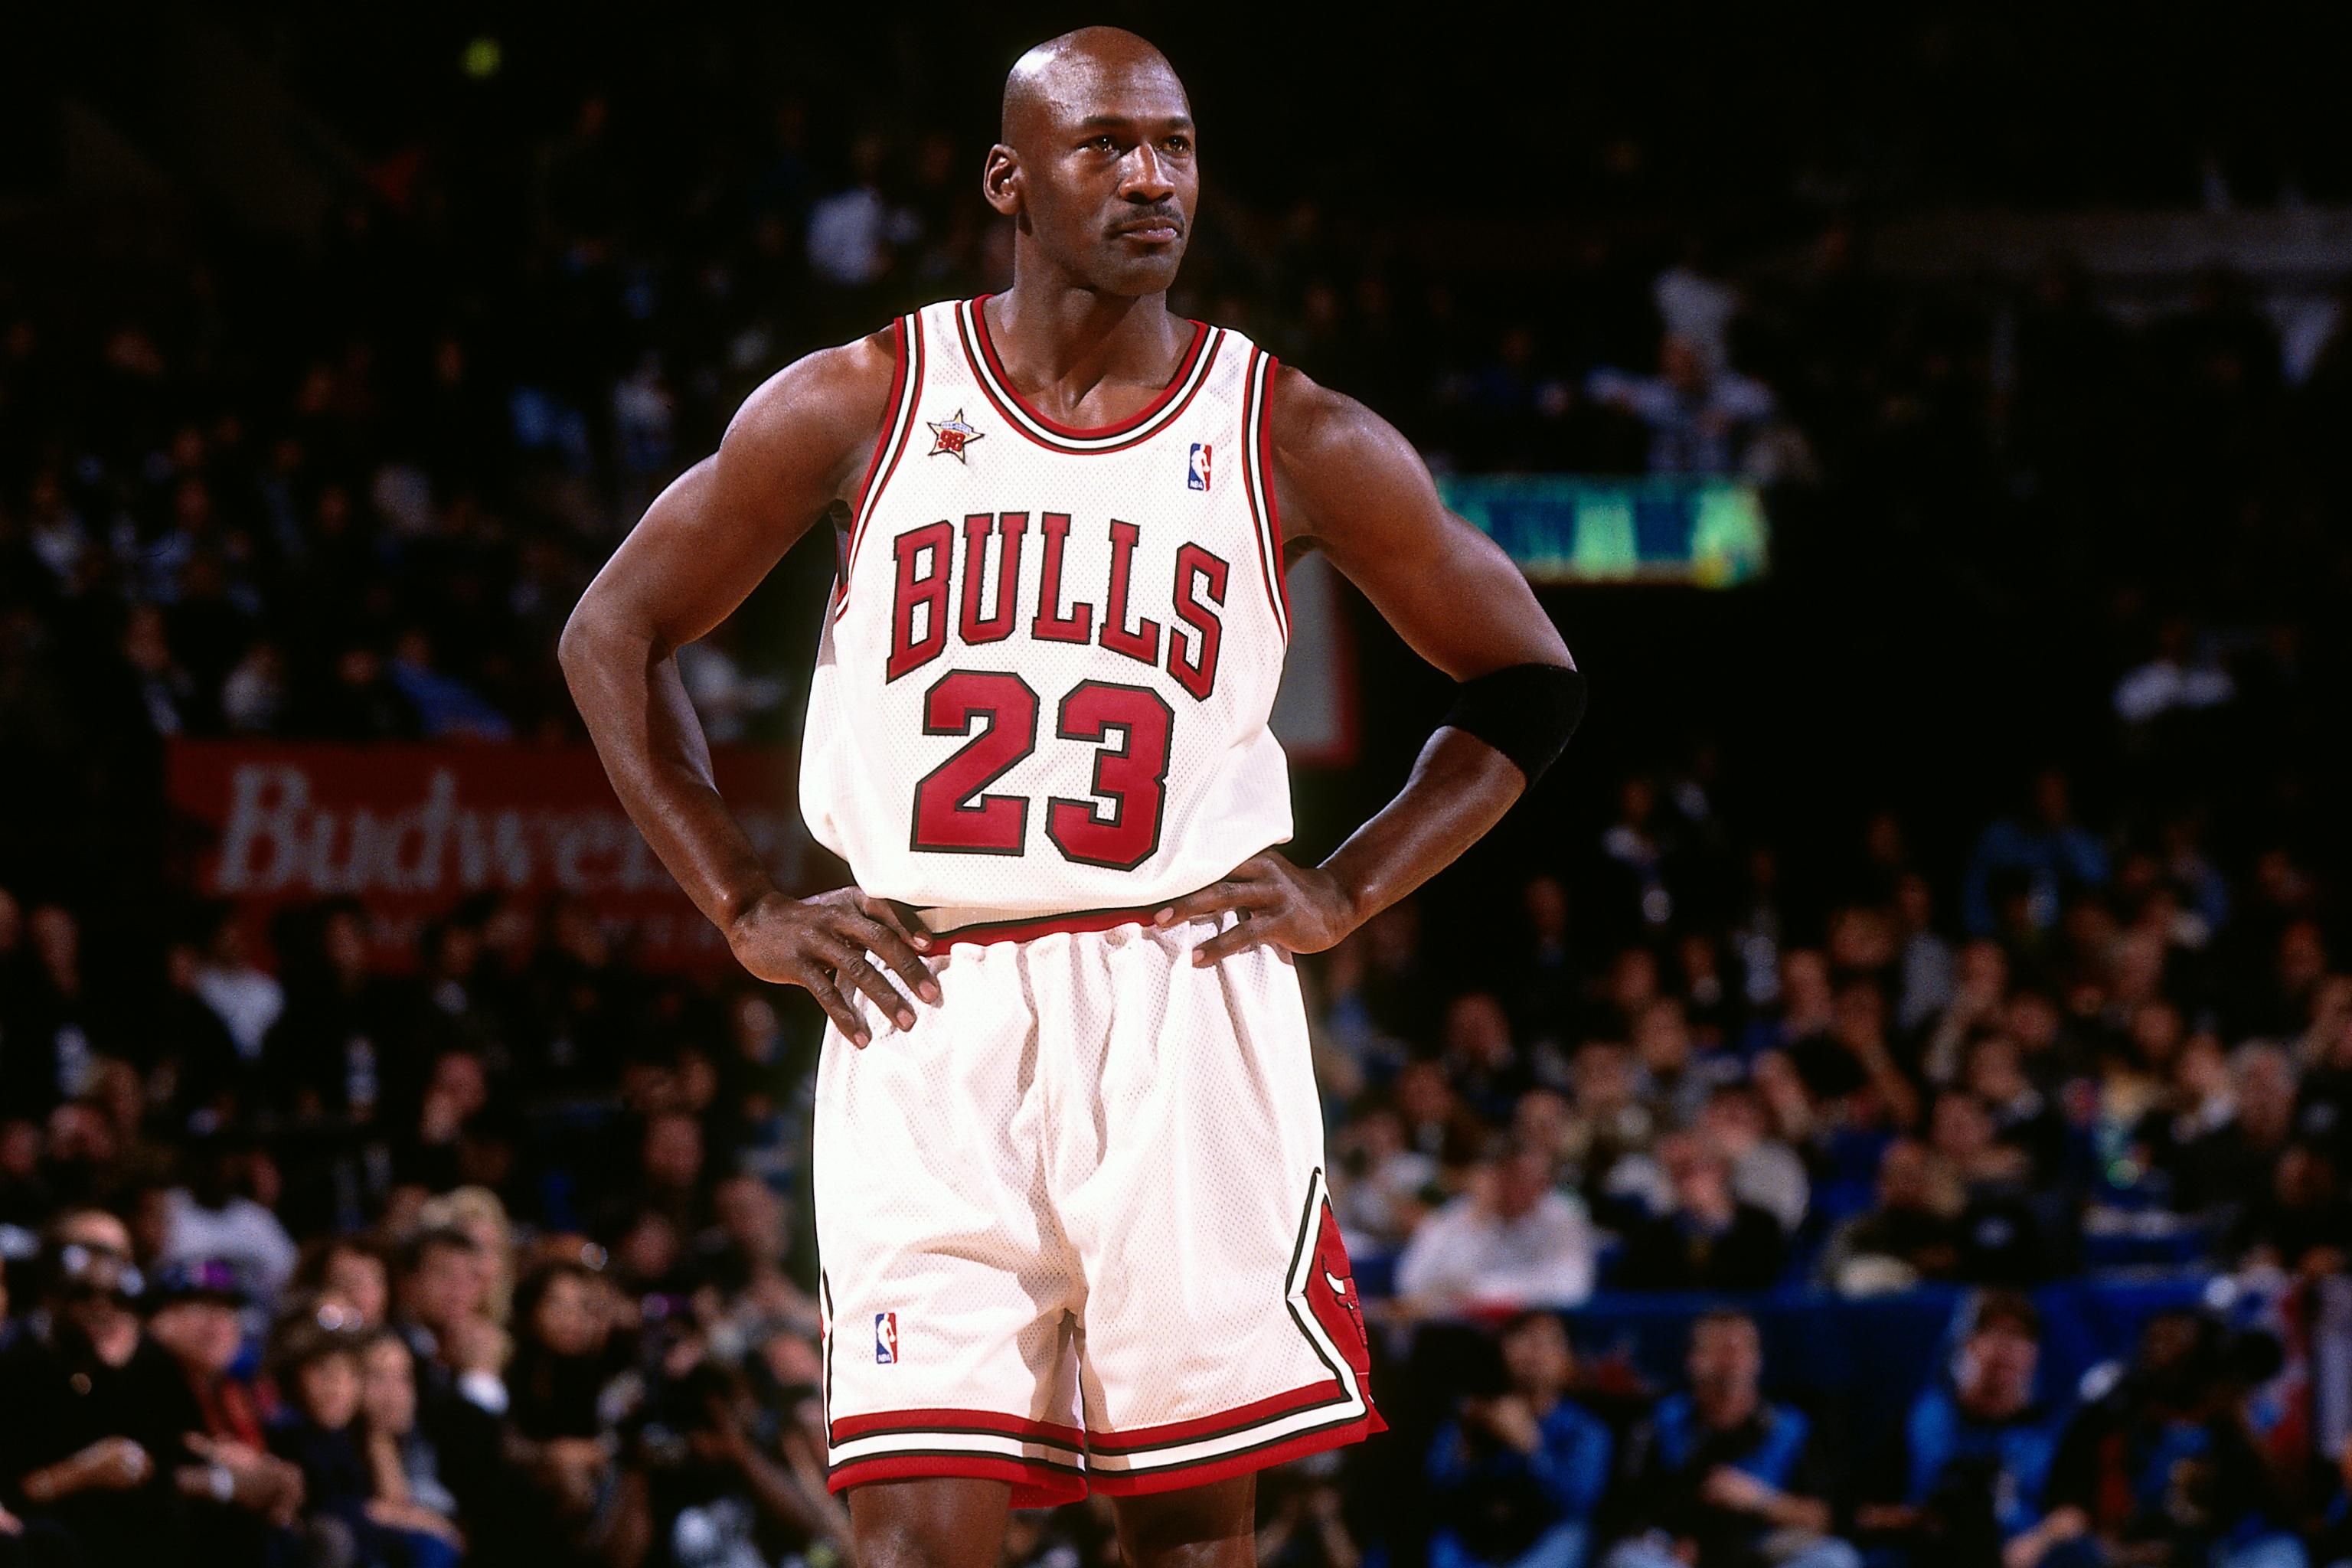 You won't believe how much Michael Jordan's jersey from the 1998